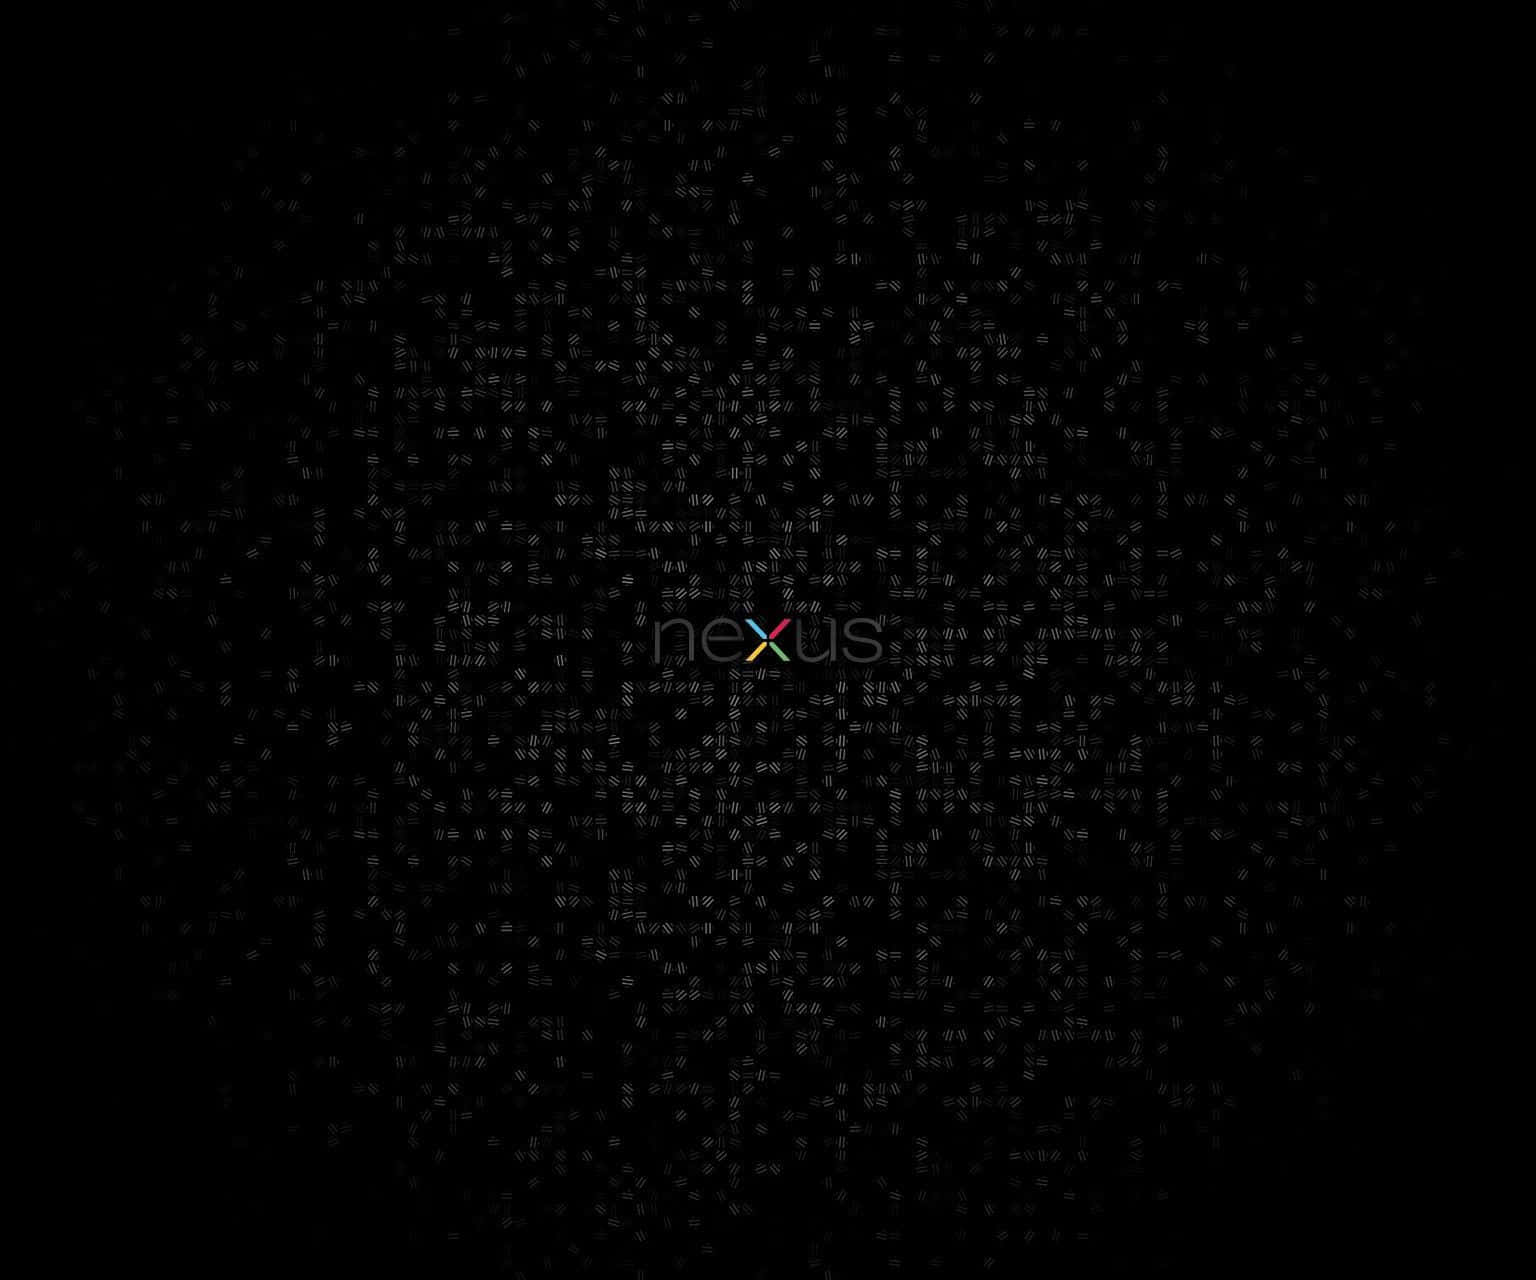 A Black Background With A Pixelated Image Of A Square Wallpaper